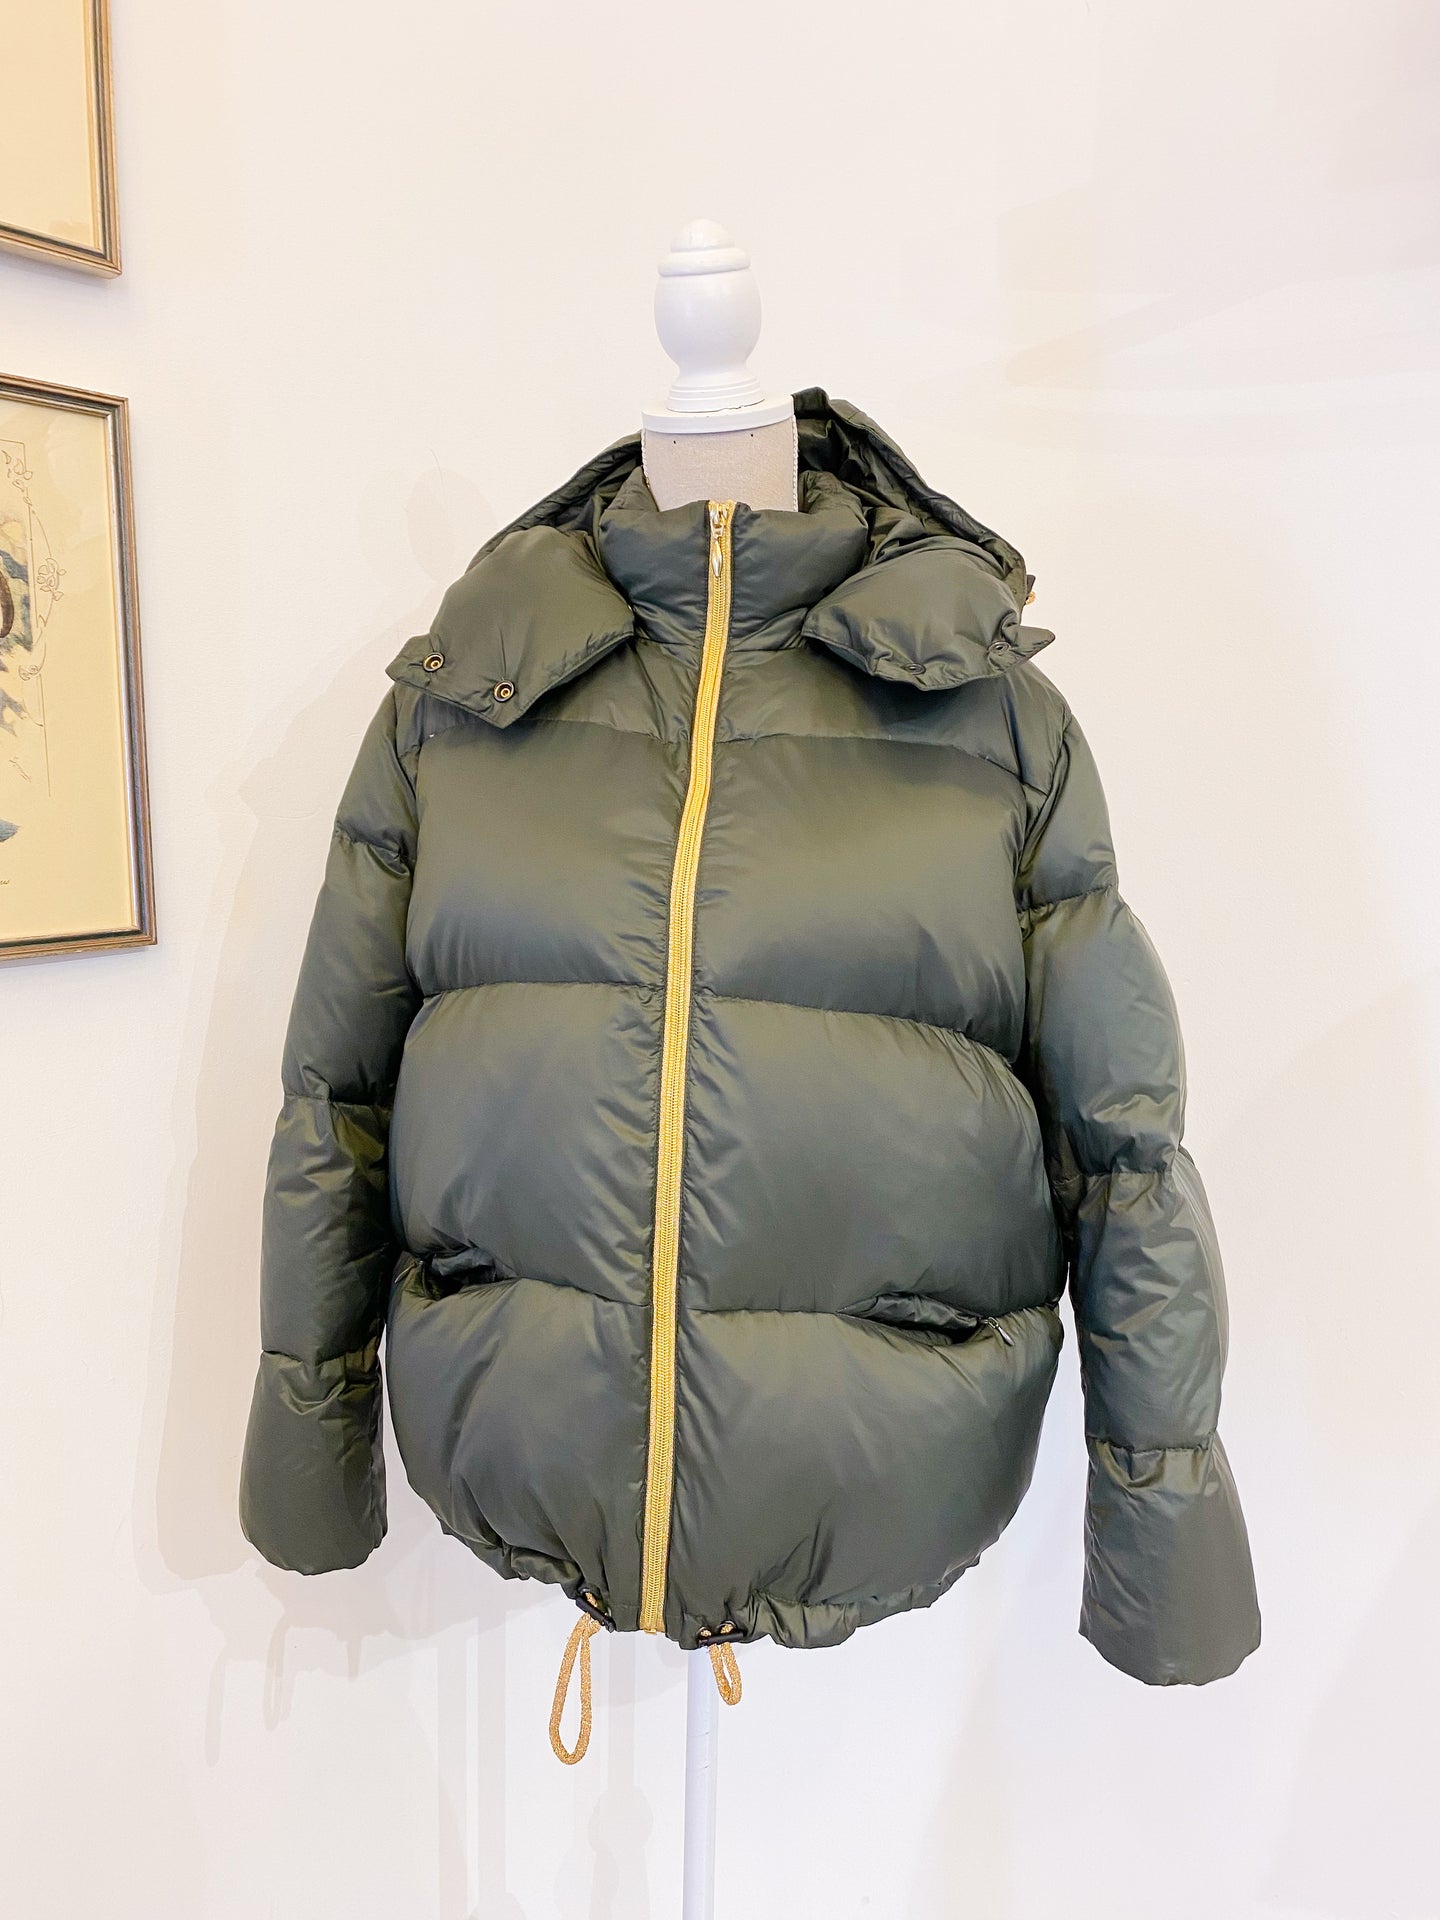 Not for all down jacket - Size 46